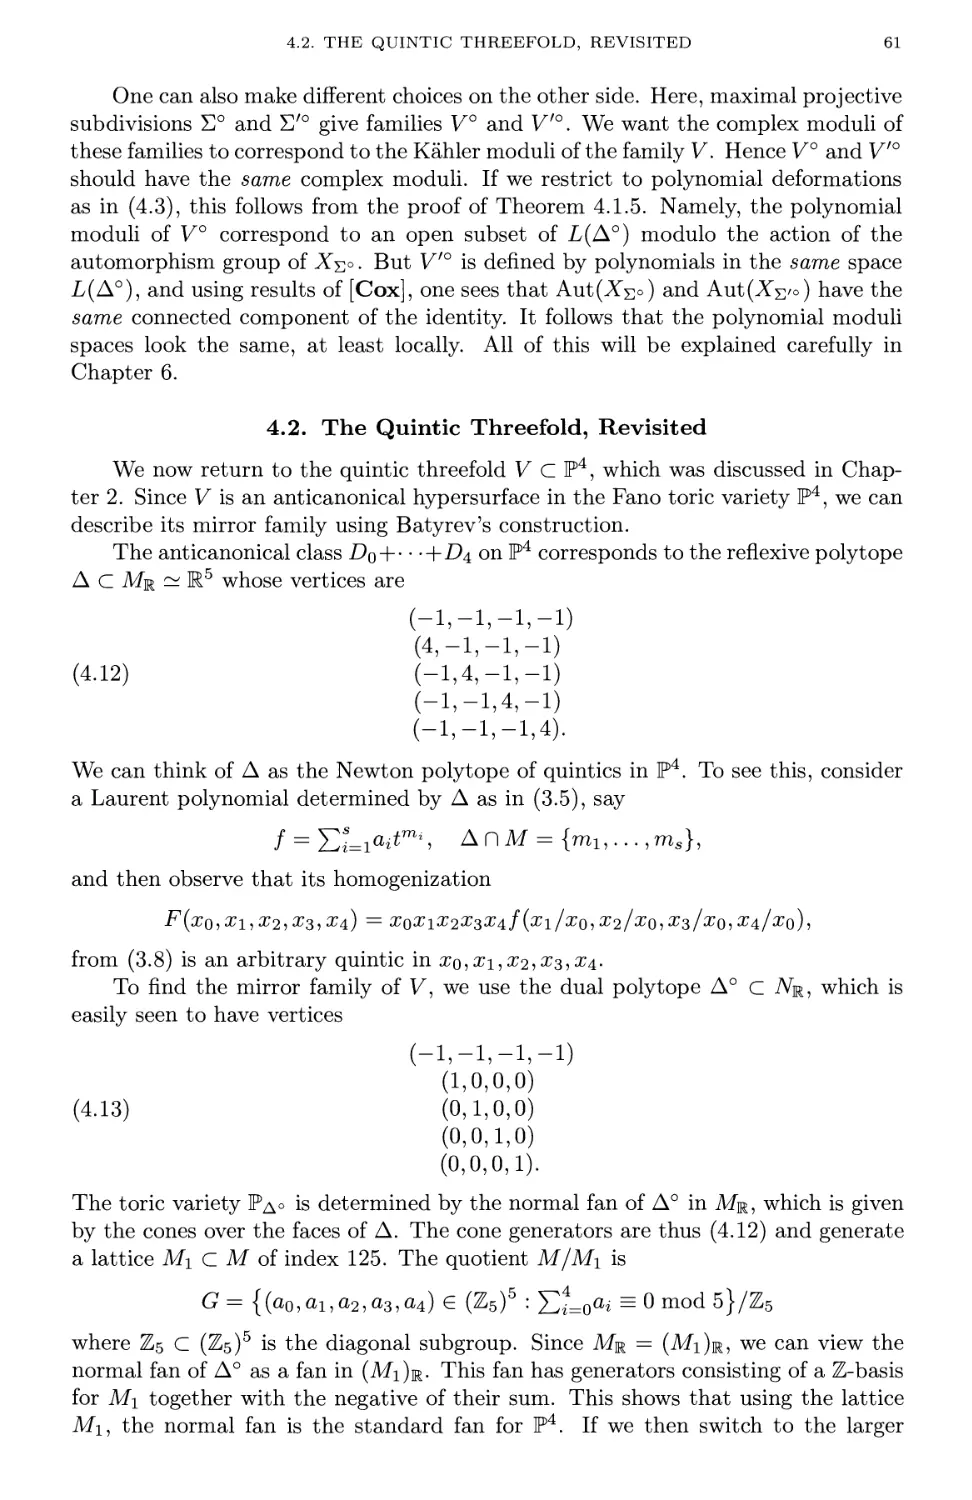 4.2. The Quintic Threefold, Revisited